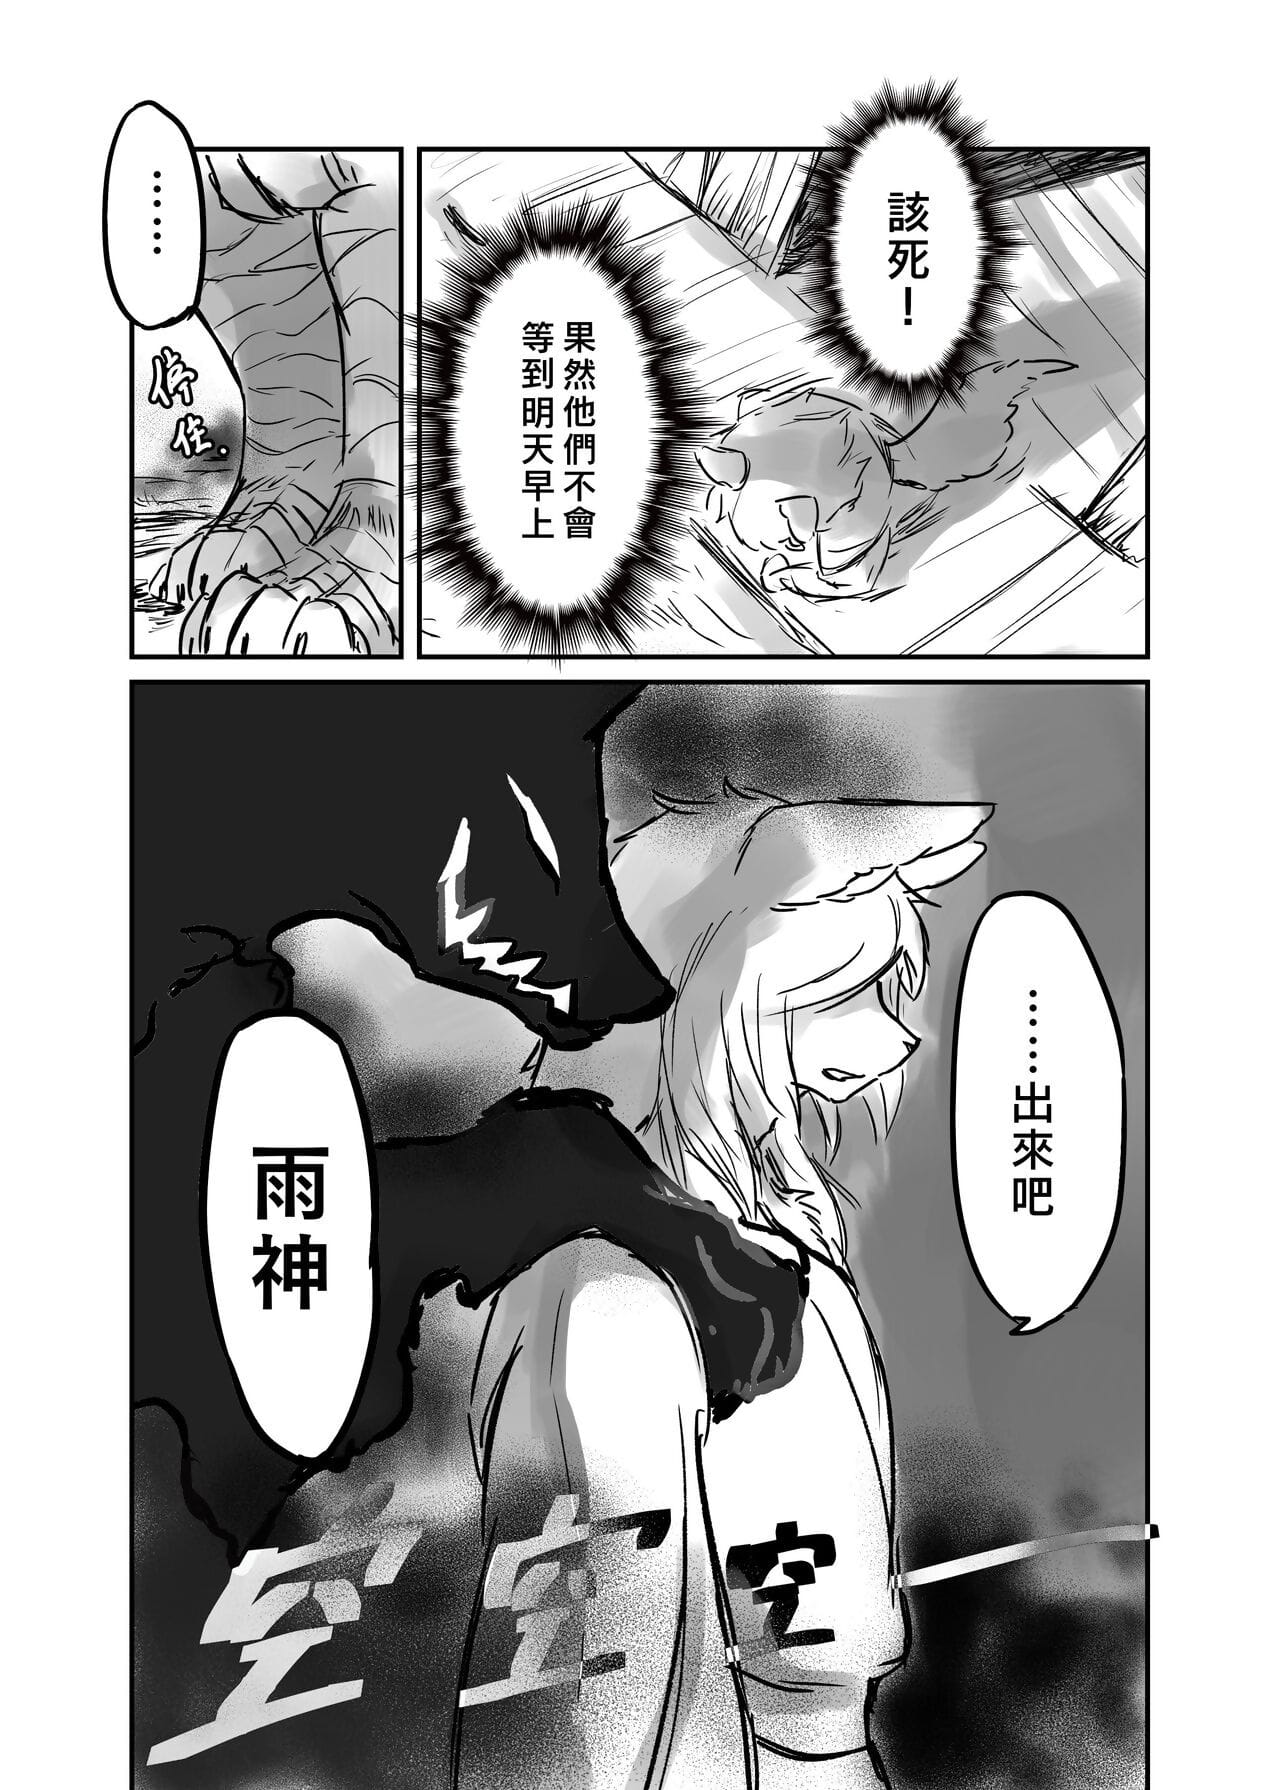 （the visiteur 他乡之人 by：鬼流 PARTIE 2 page 1